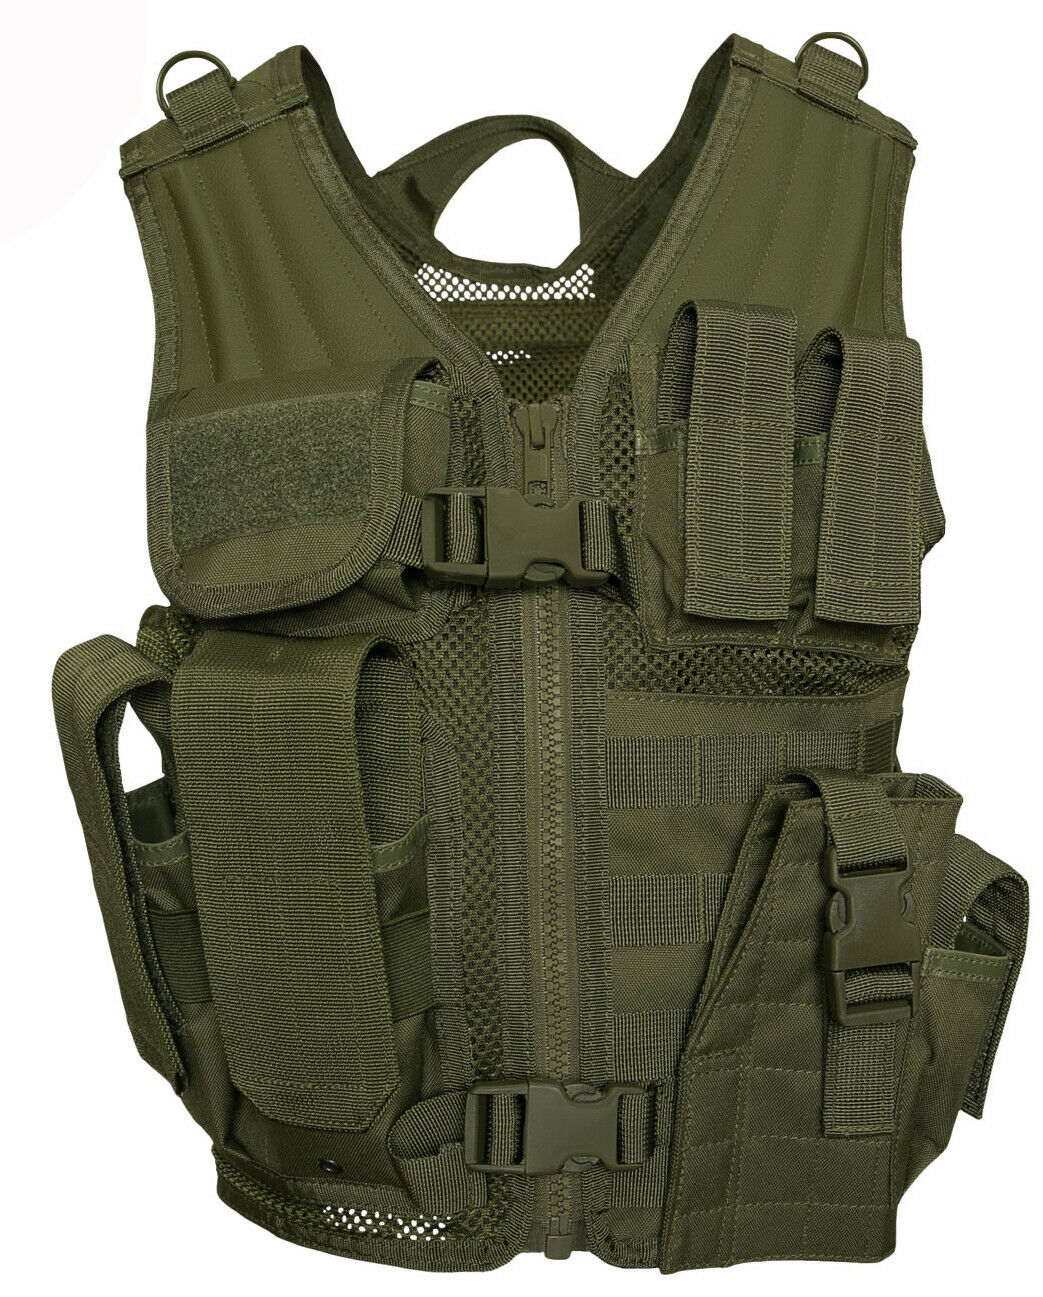 Rothco Kid's Tactical Cross Draw Vest - Olive Drab